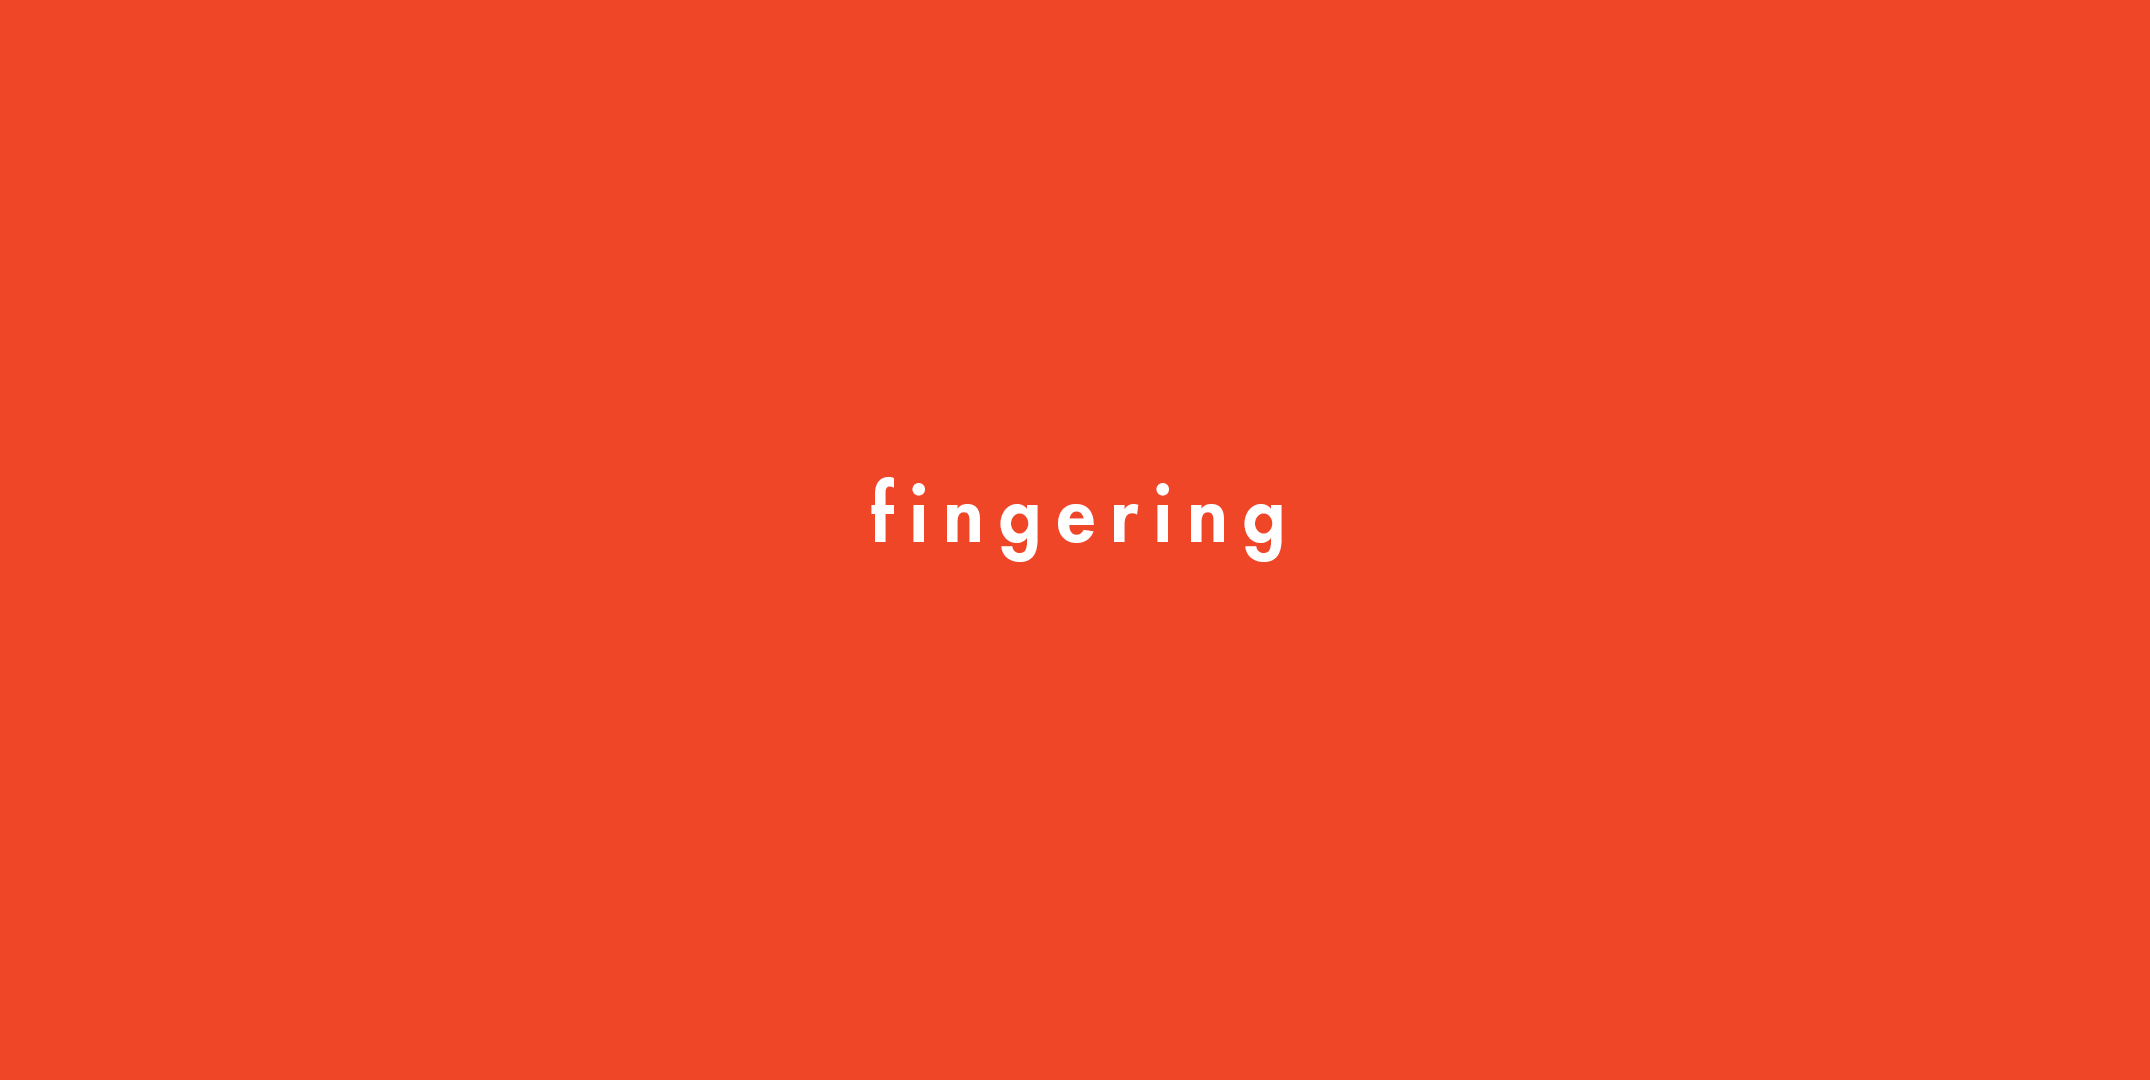 Vagina Fingering Massage - What Does Fingering Mean - How to Finger Bang a Woman